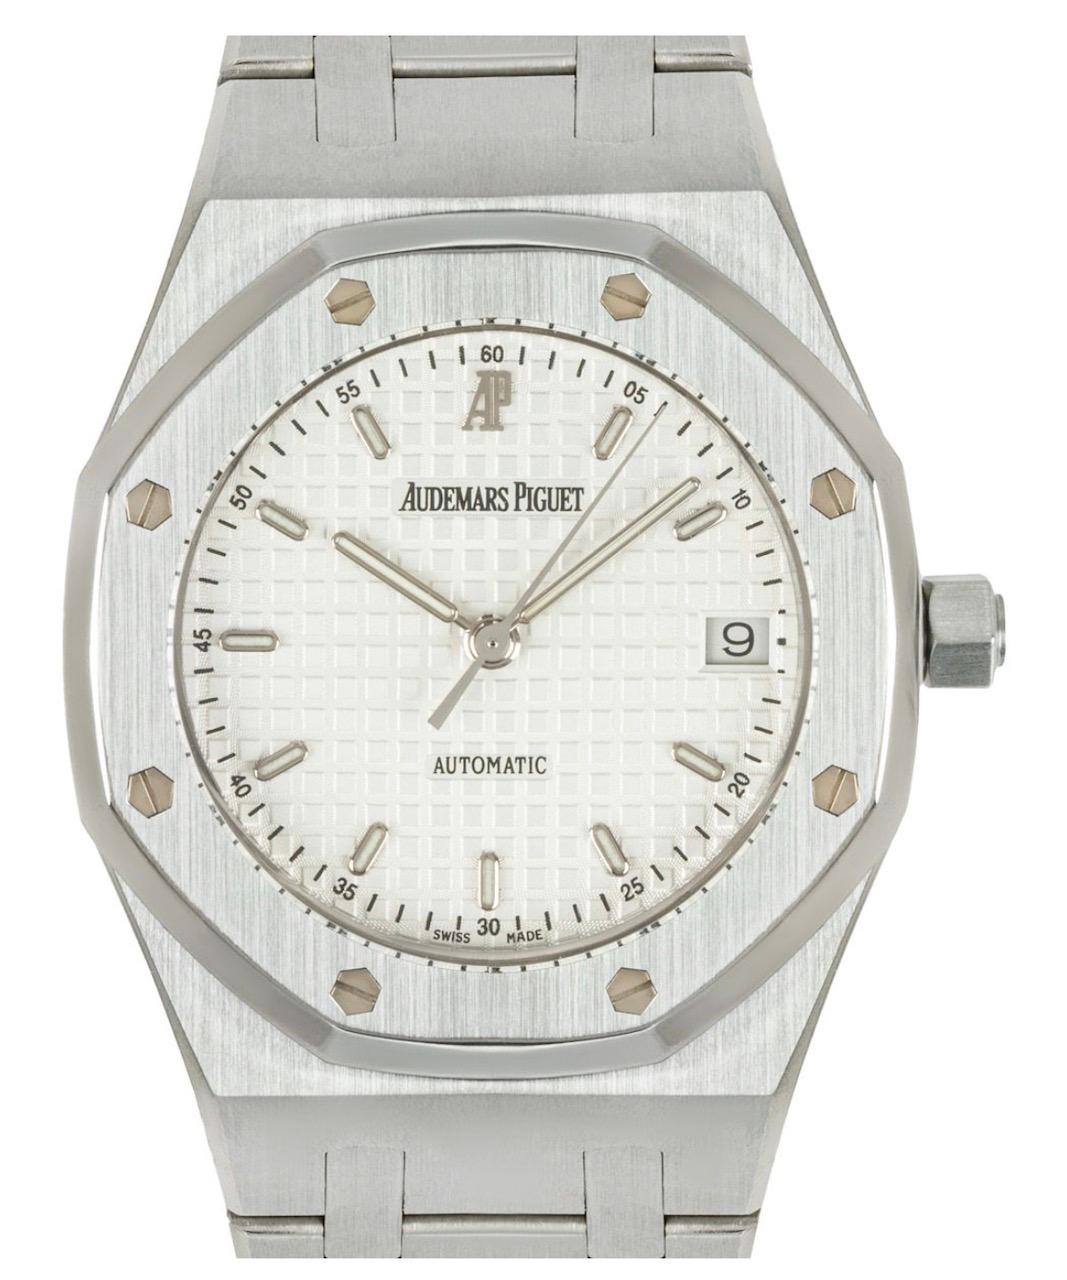 A 36mm stainless steel Royal Oak by Audemars Piguet. Featuring a white dial with a grande tapisserie pattern and a date aperture. The bezel further features the iconic 8-screw design synonymous with Audemars Piguet.

Equipped with a steel bracelet